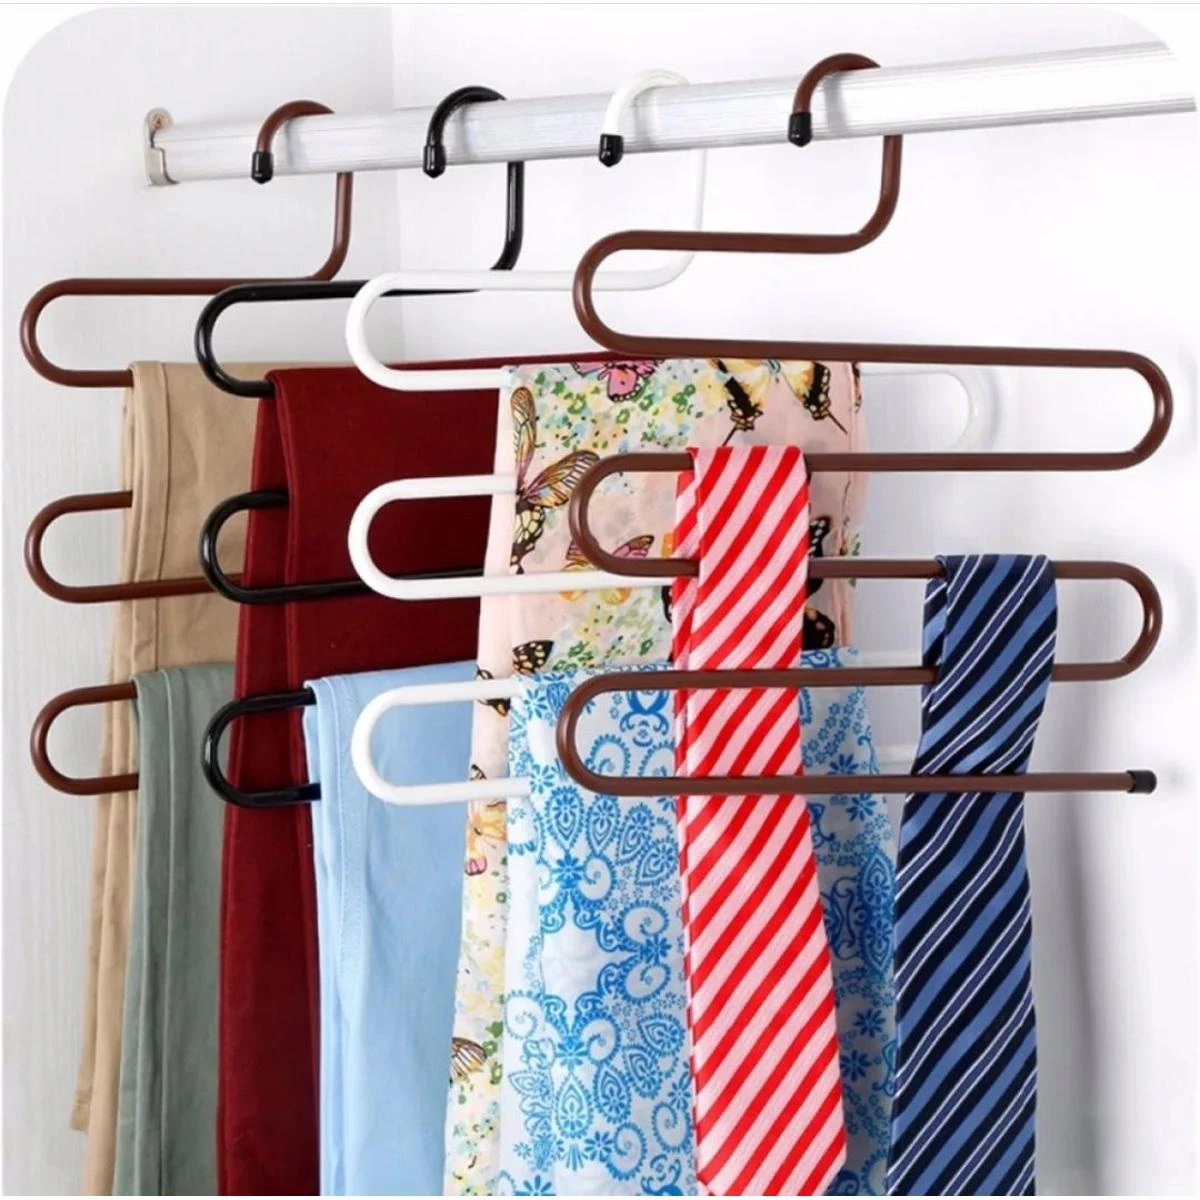 Stainless Steel S-Shape 5 Layer Cloth Hanger Pants Trousers Hanger clothing metal hangers Multi Layer folding Metal clothes Rack